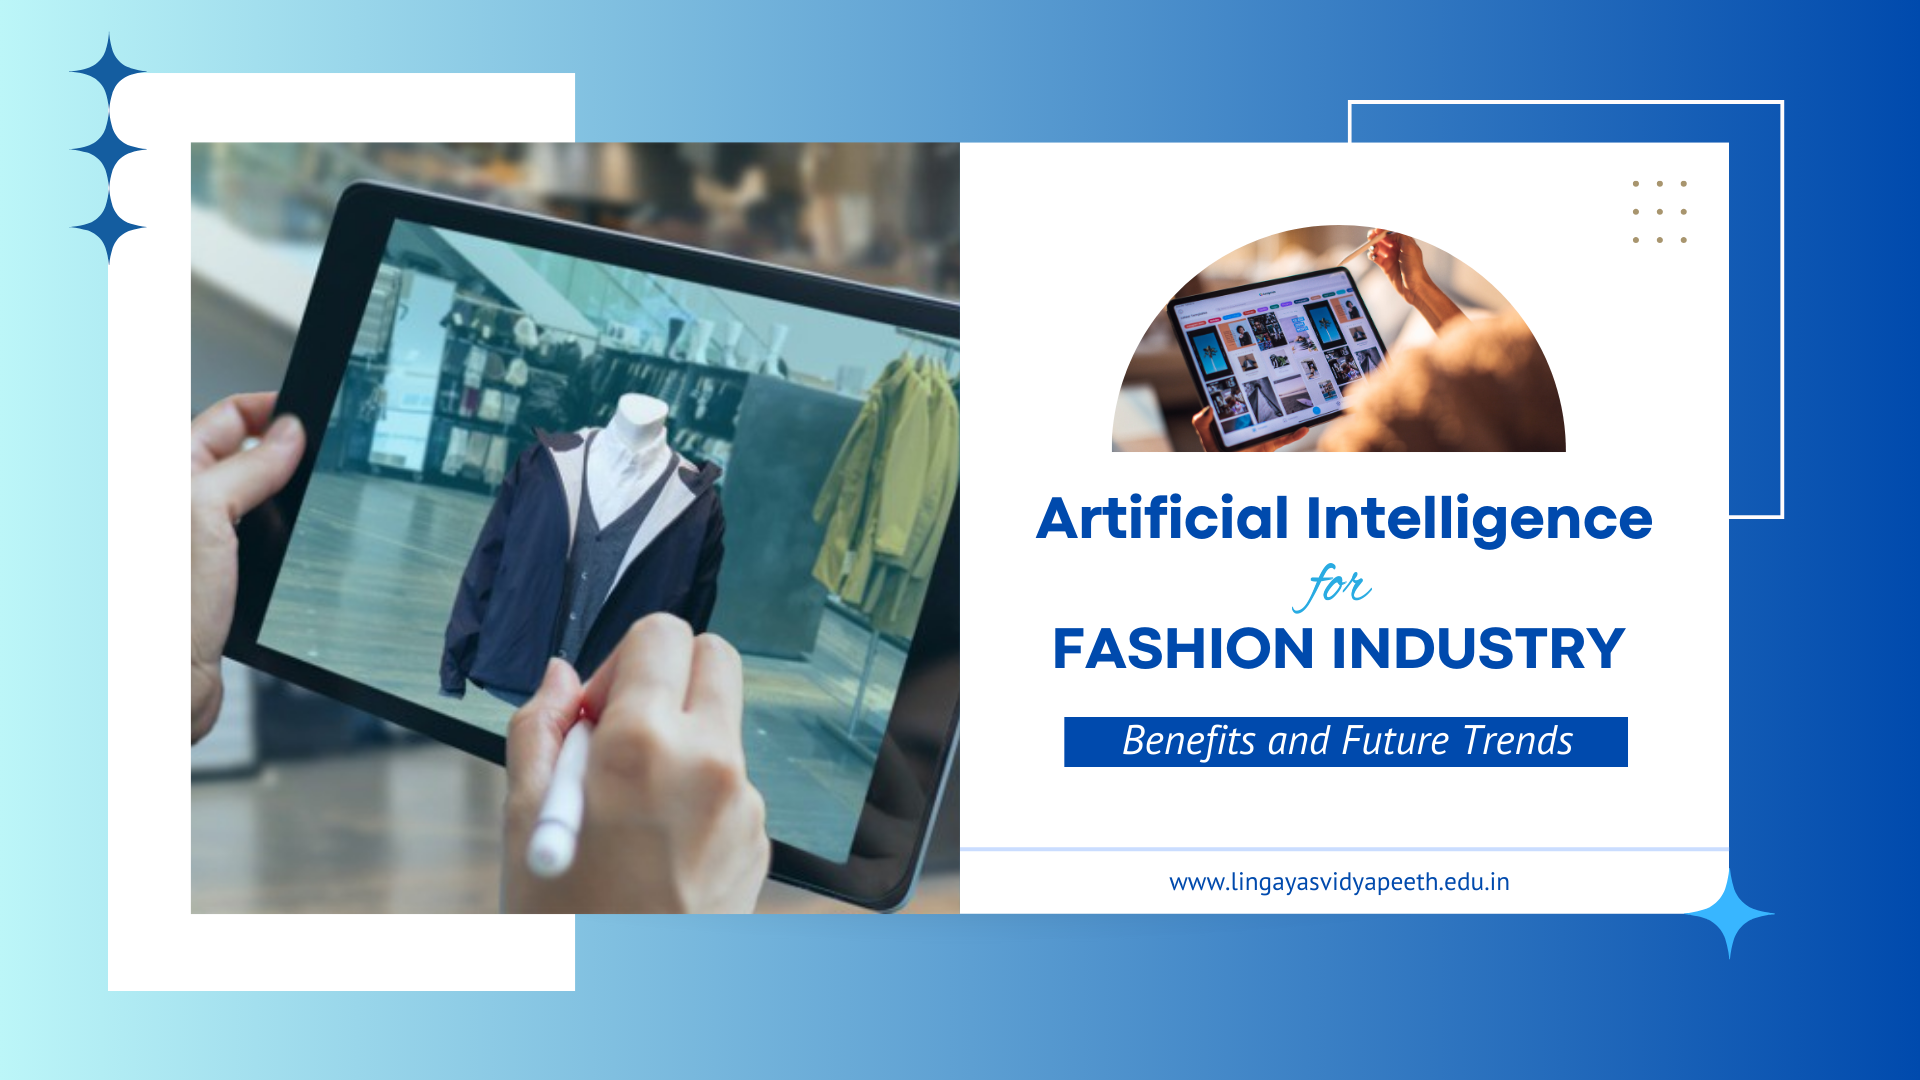 The Future of Artificial Intelligence in the Fashion Industry